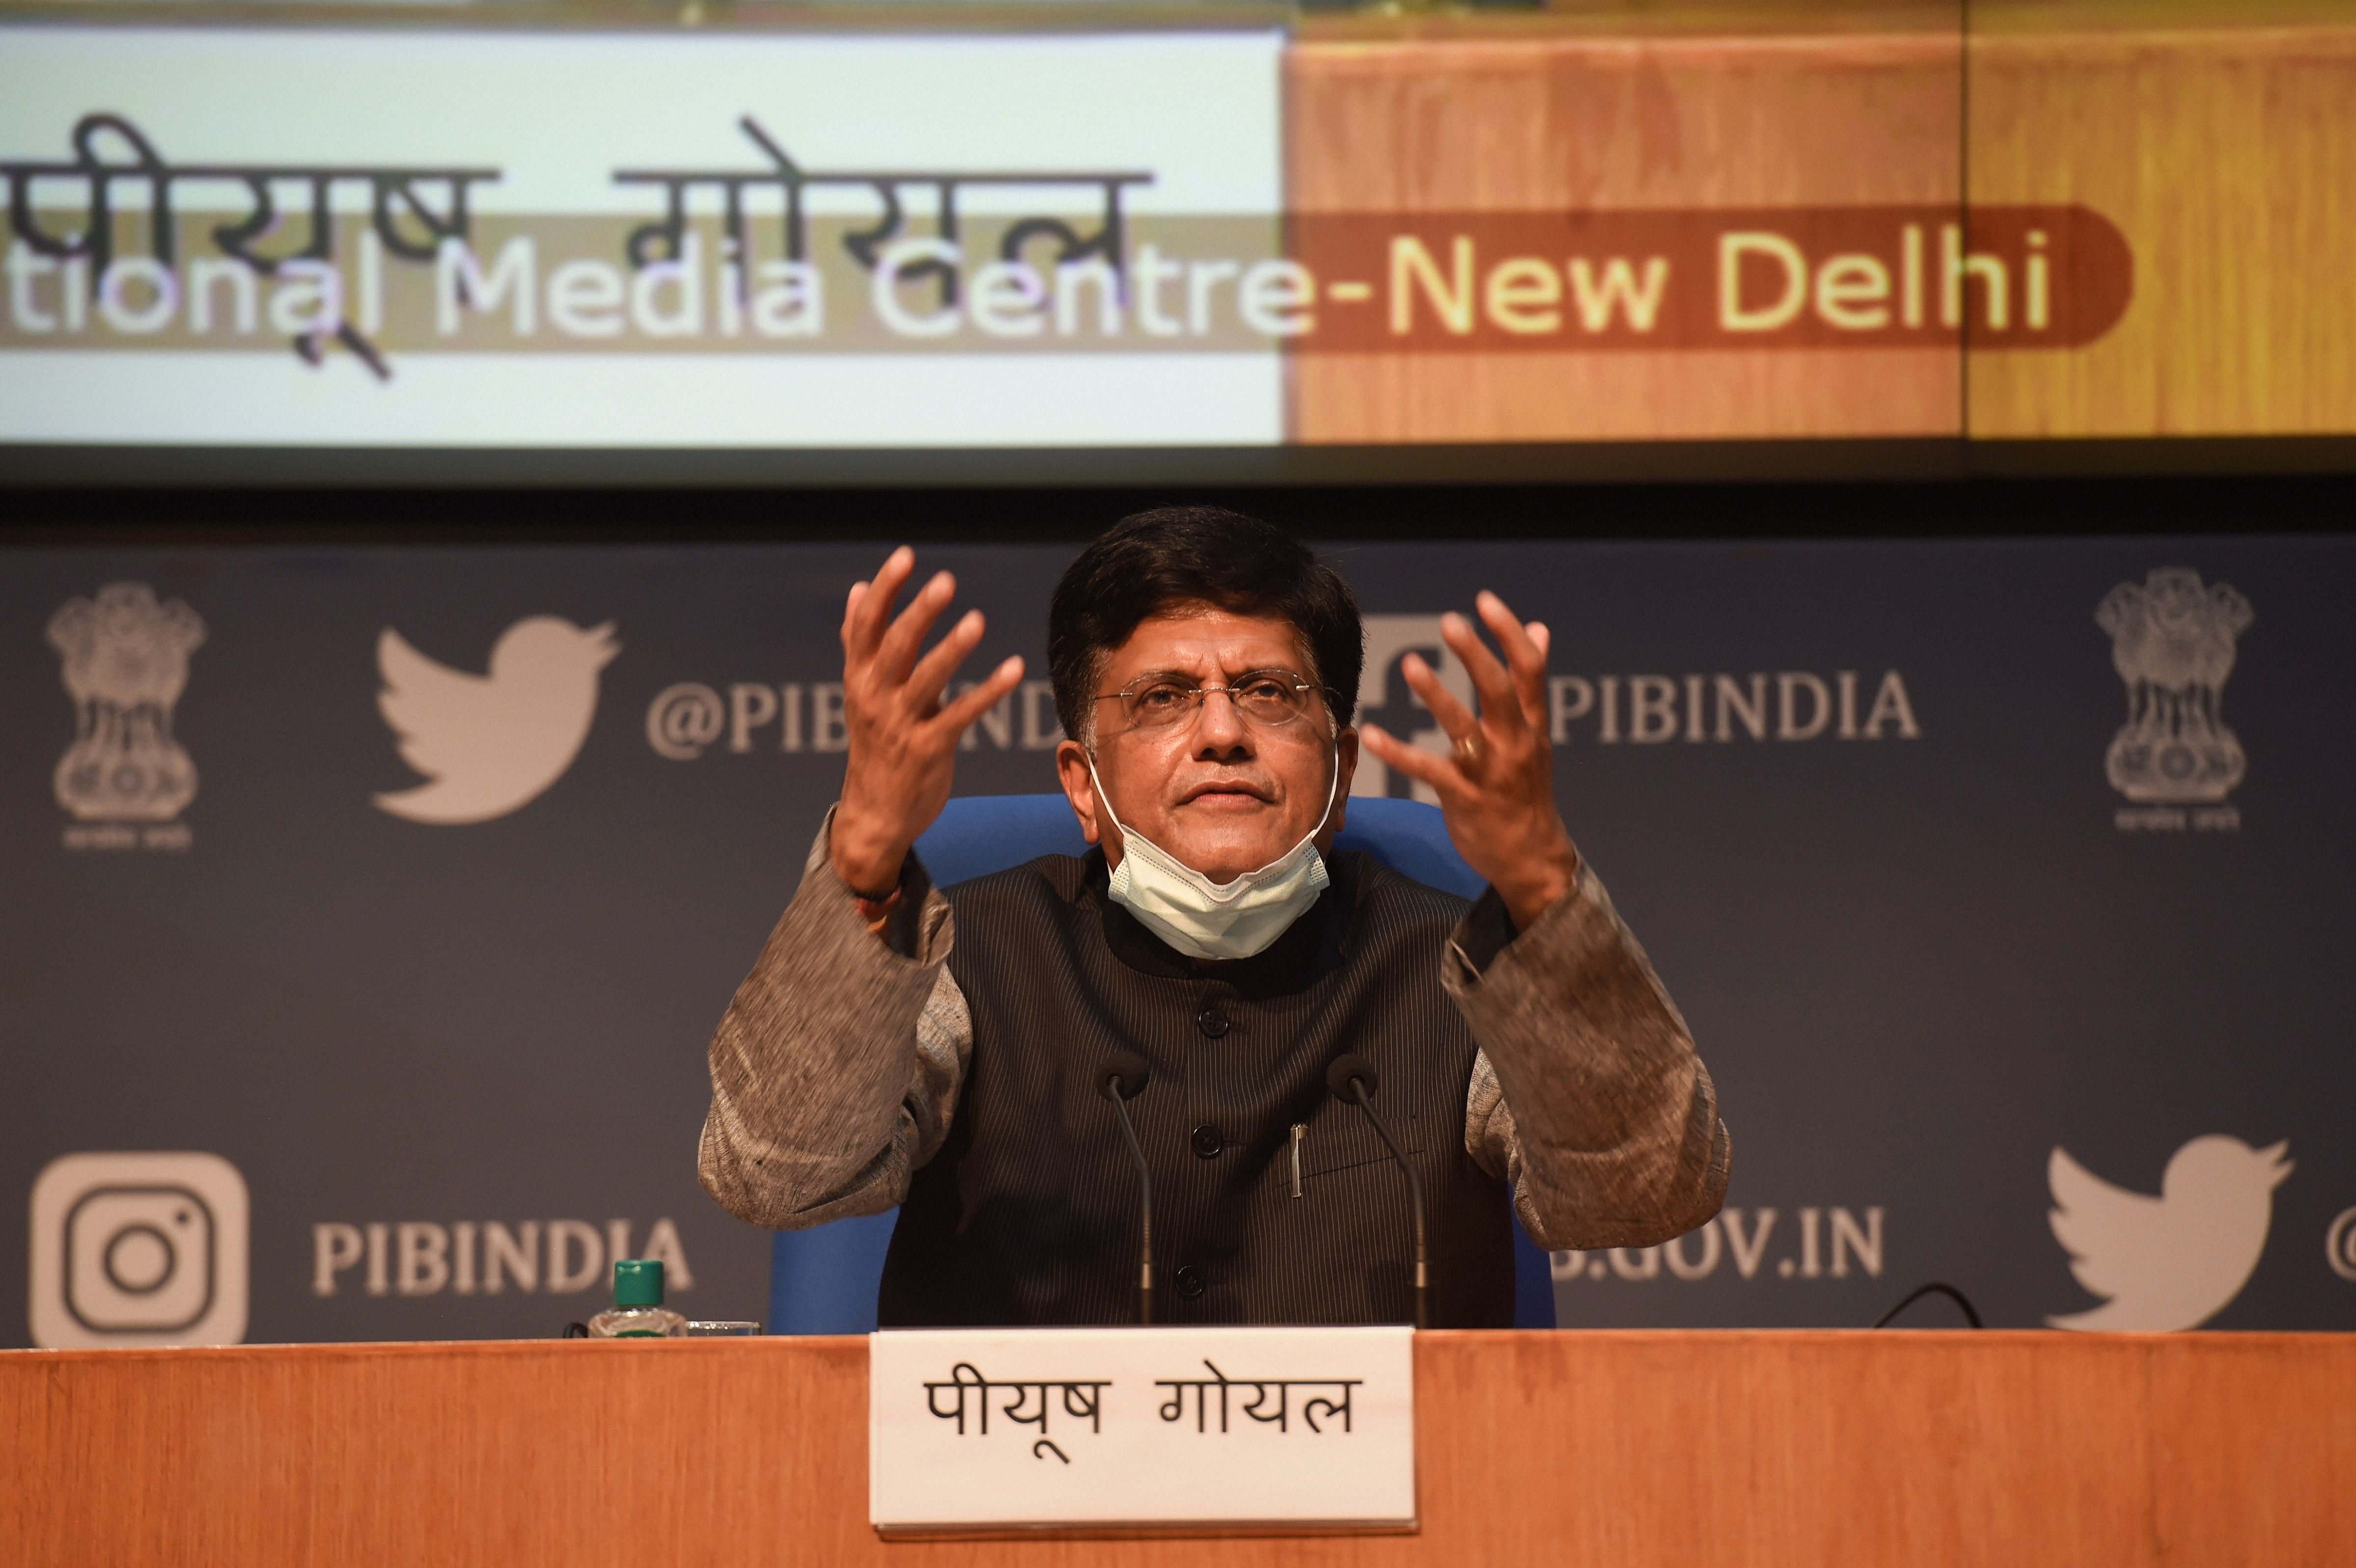  Union Minister of Commerce and Industry Piyush Goyal addresses a press conference during the release of the assessment report of State Business Reform Action Plan 2019, in New Delhi, Saturday, Sept. 5, 2020. Credit: PTI Photo